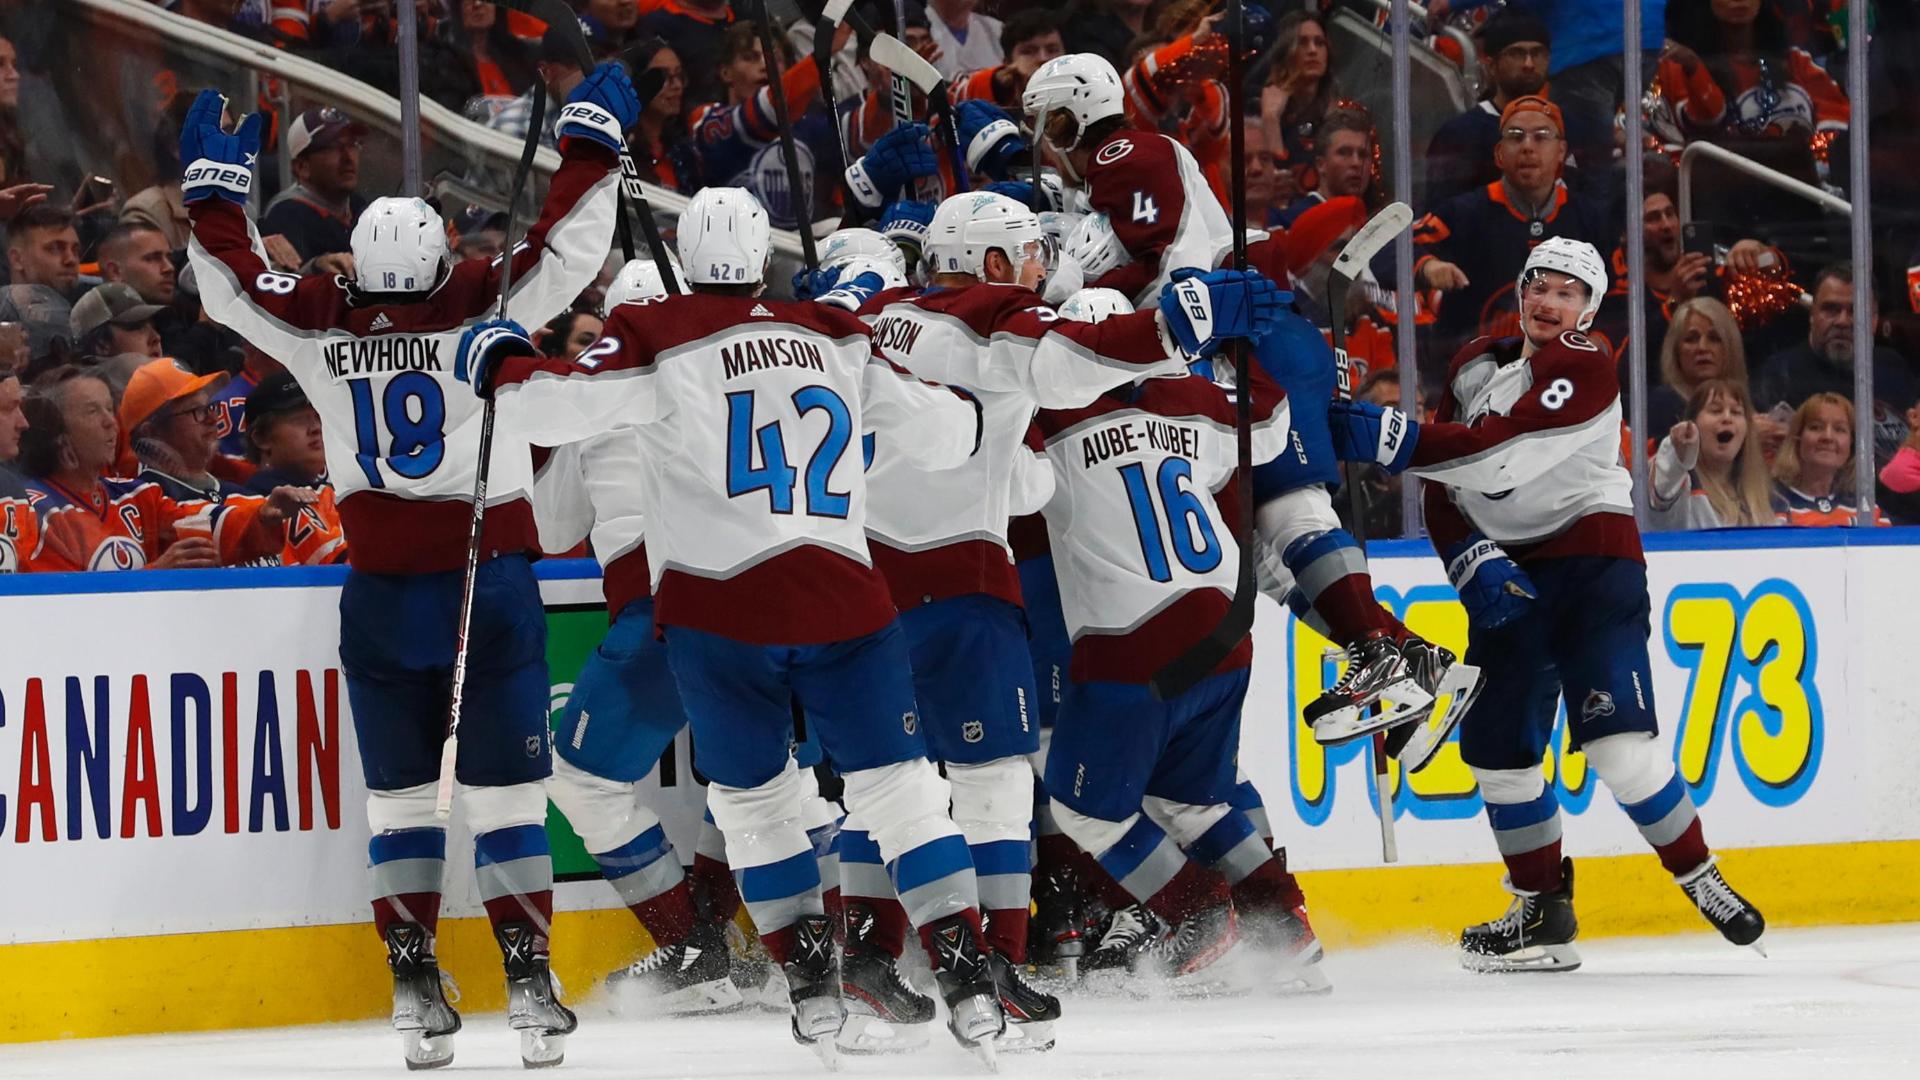 Colorado Avalanche gear flying off shelves after Stanley Cup win